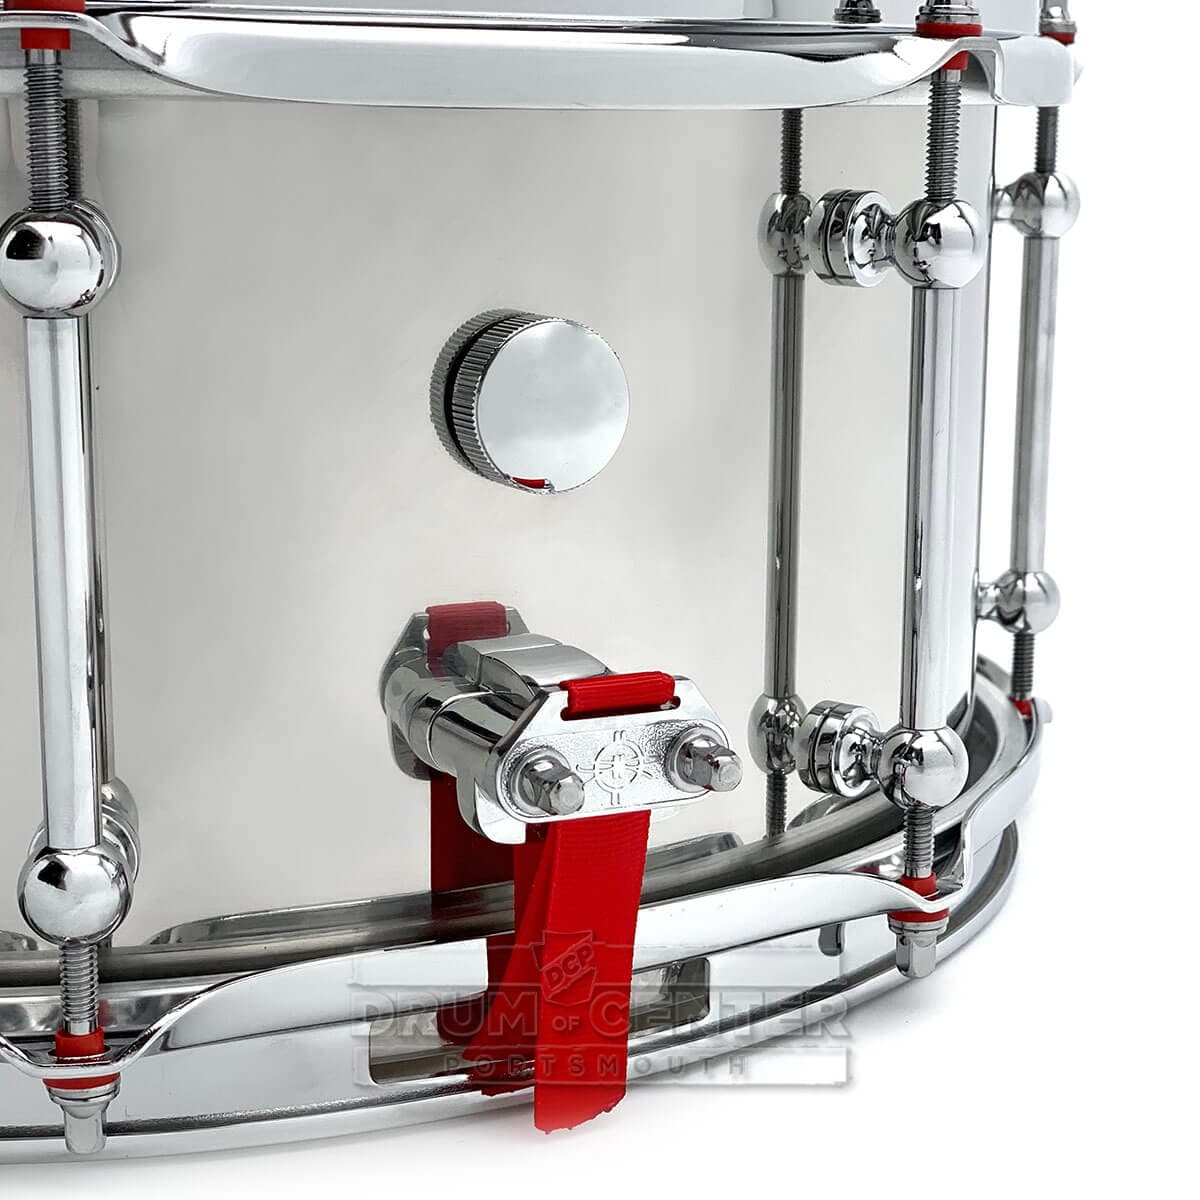 Dunnett Classic Stainless Steel Snare Drum 14x6.5 Polished